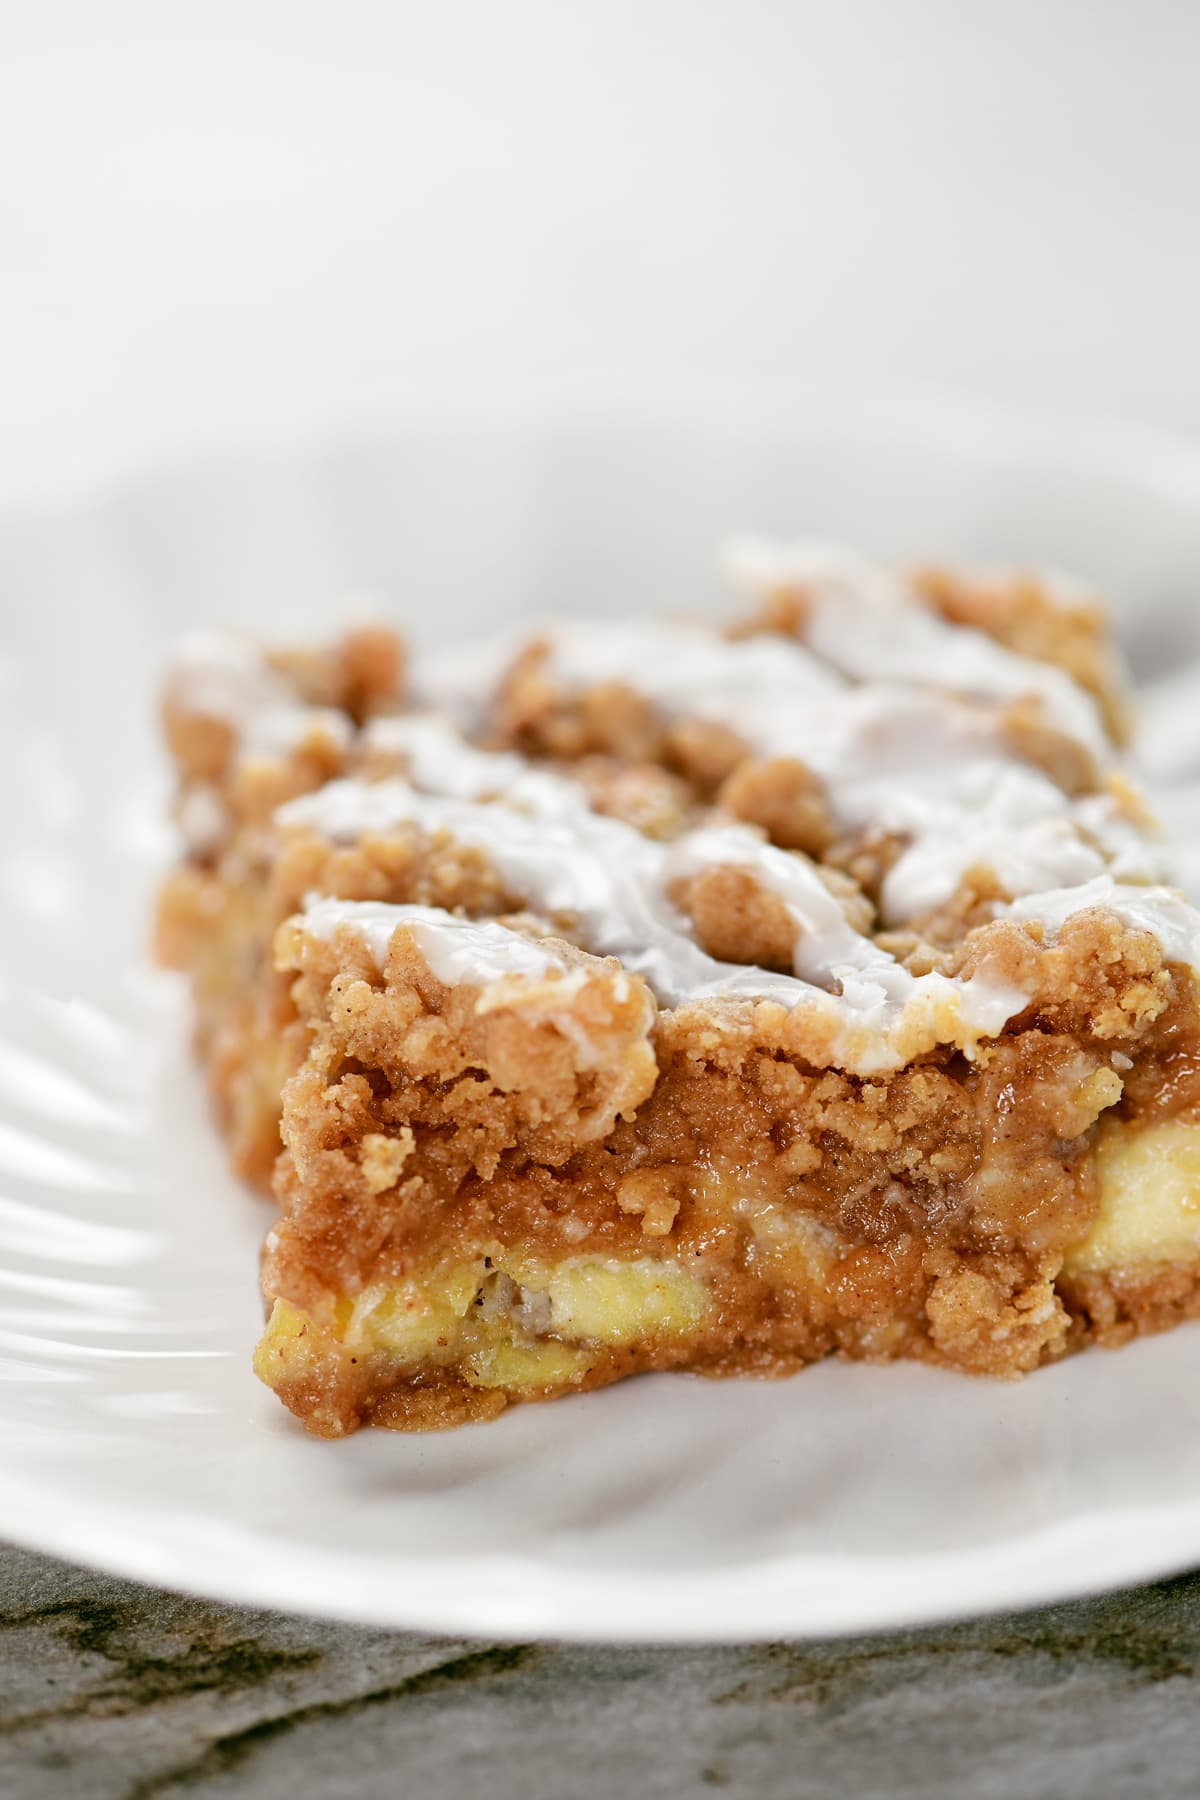 A slice of an apple bar with icing on top.